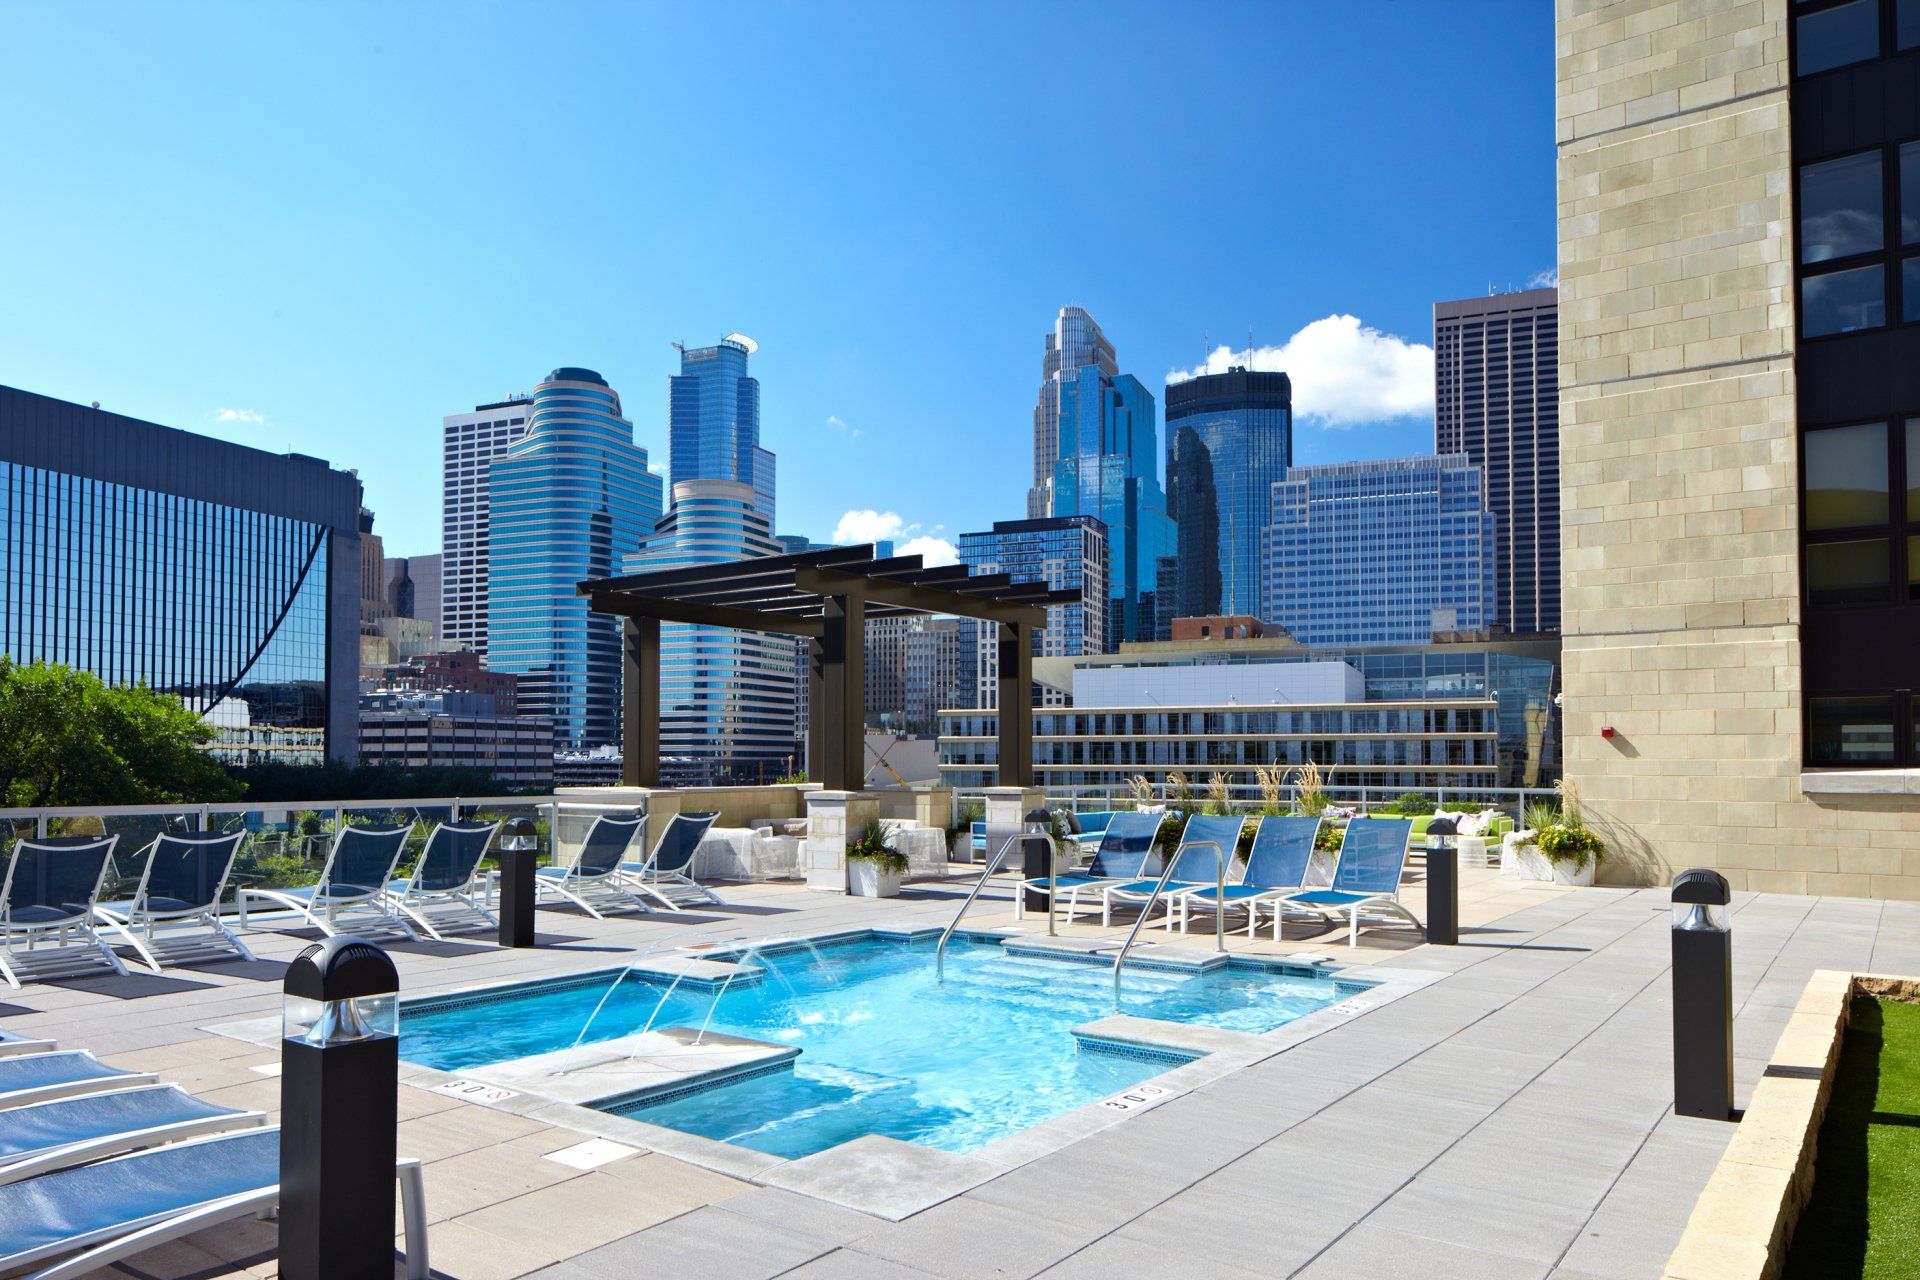 A large swimming pool with a city skyline in the background at 222 Hennepin Apartments.